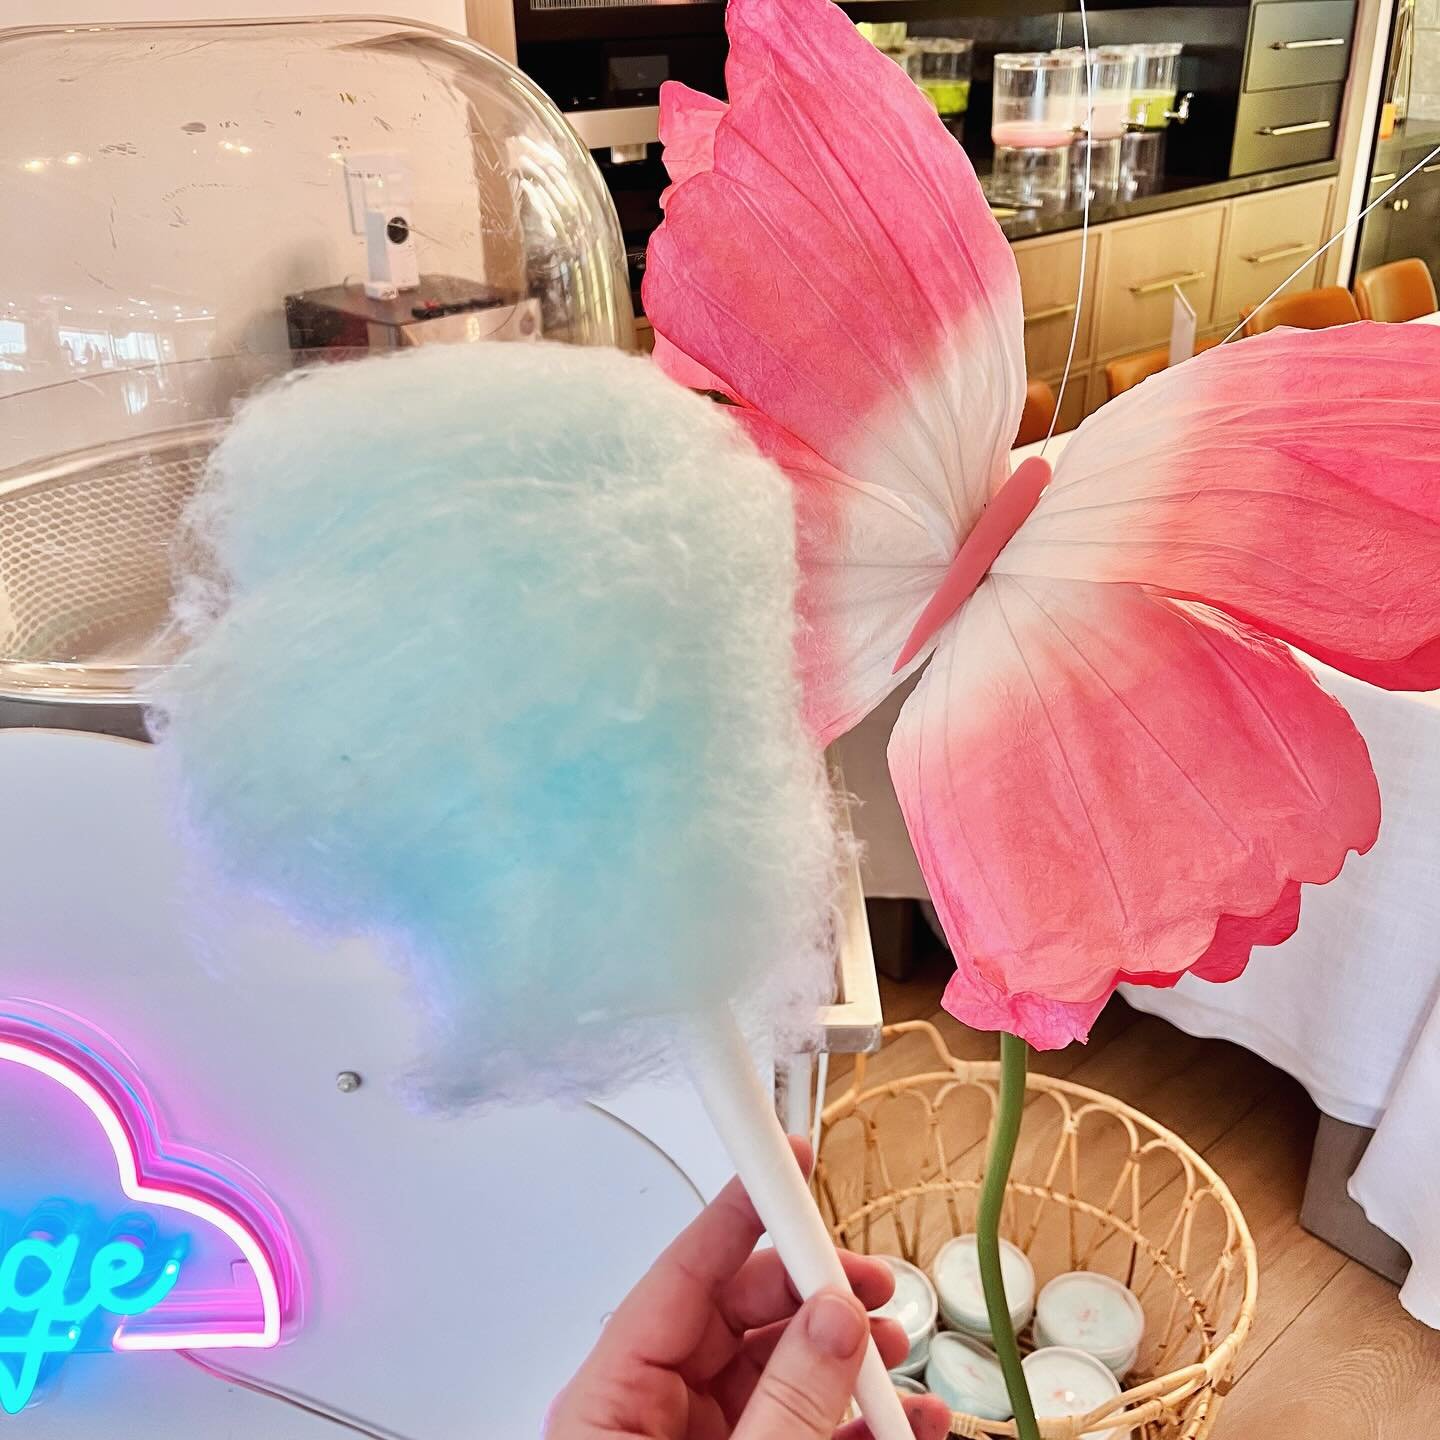 Wilamina&rsquo;s turned 9, and she did it in style! Swiftie theme for the win ✨💕☁️

Cotton candy cart: @nuagecottoncandy 
Style &amp; Decor: @decndeets
Marquee: @alphalitlasvegas
Photobooth: @bossybooths_lv
Cookies: @thecustomconfectionary
Boba: @br